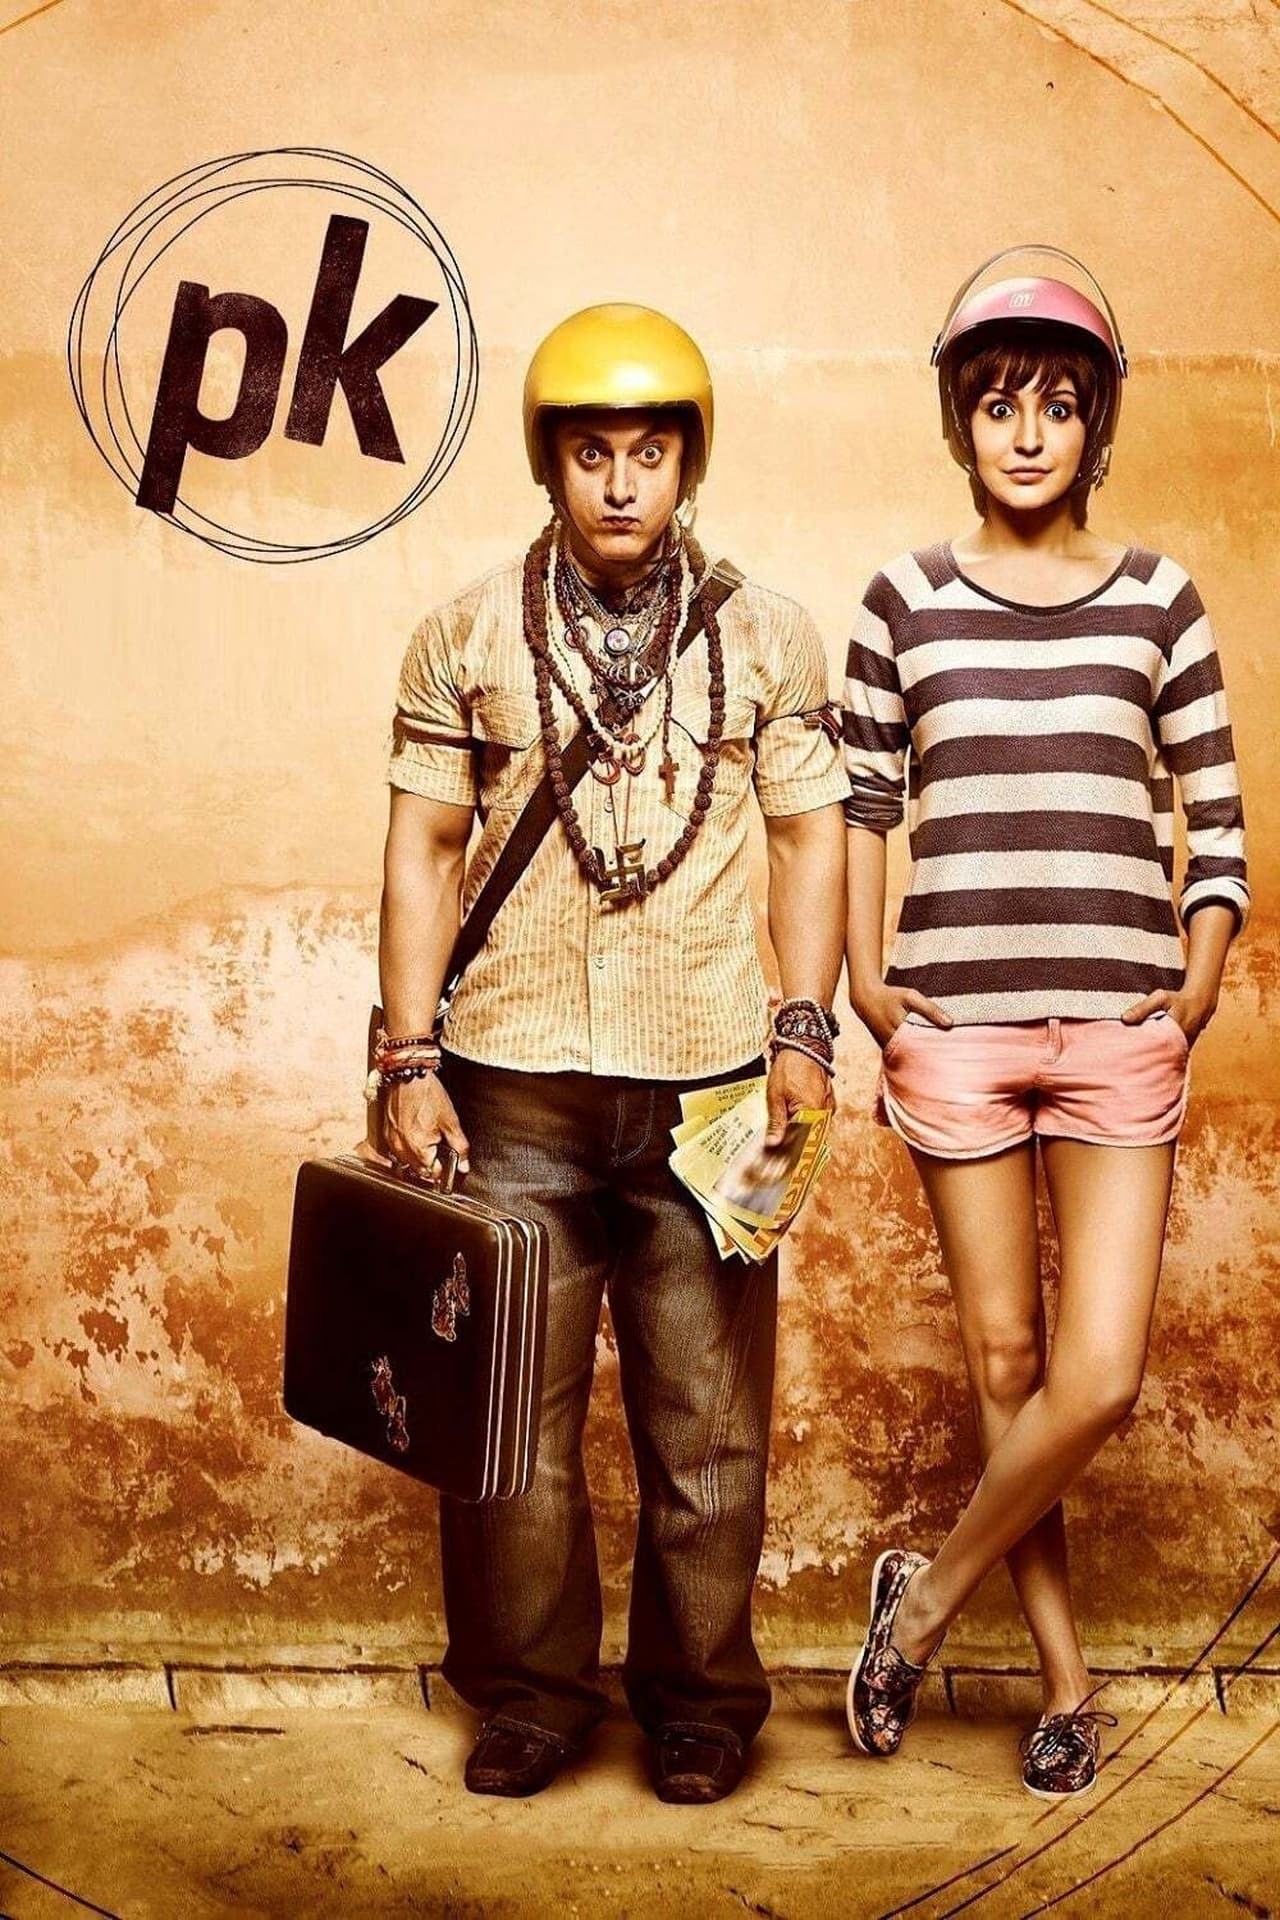 angie eigna recommends pk full movie downloads pic